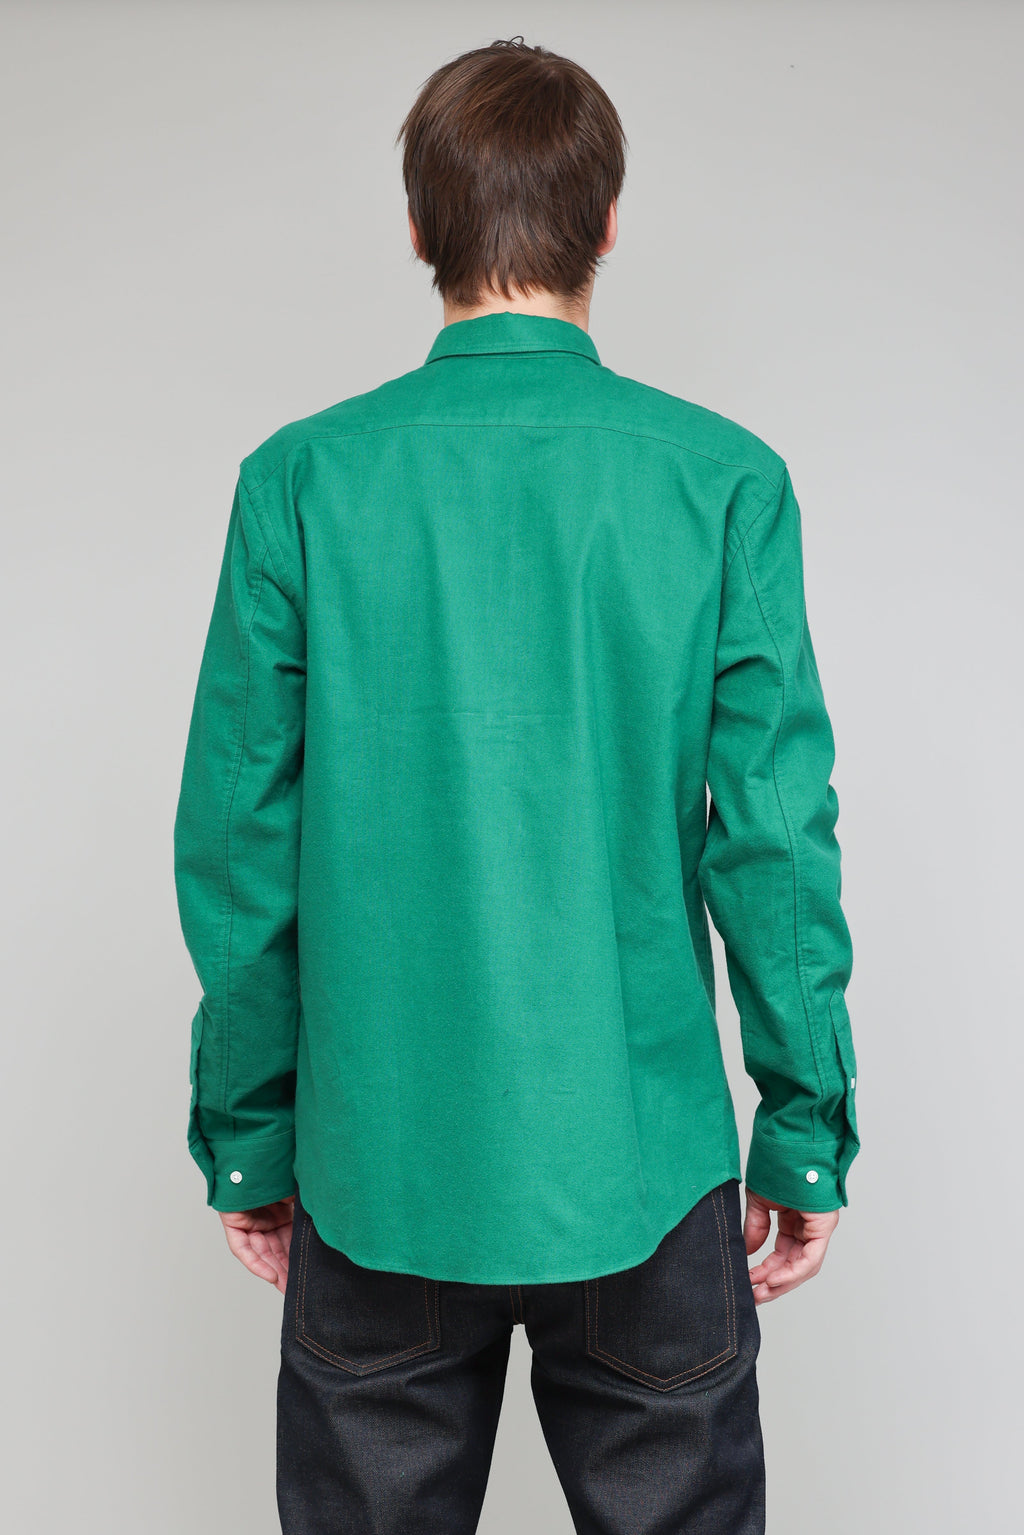 Japanese Flannel in Green 03